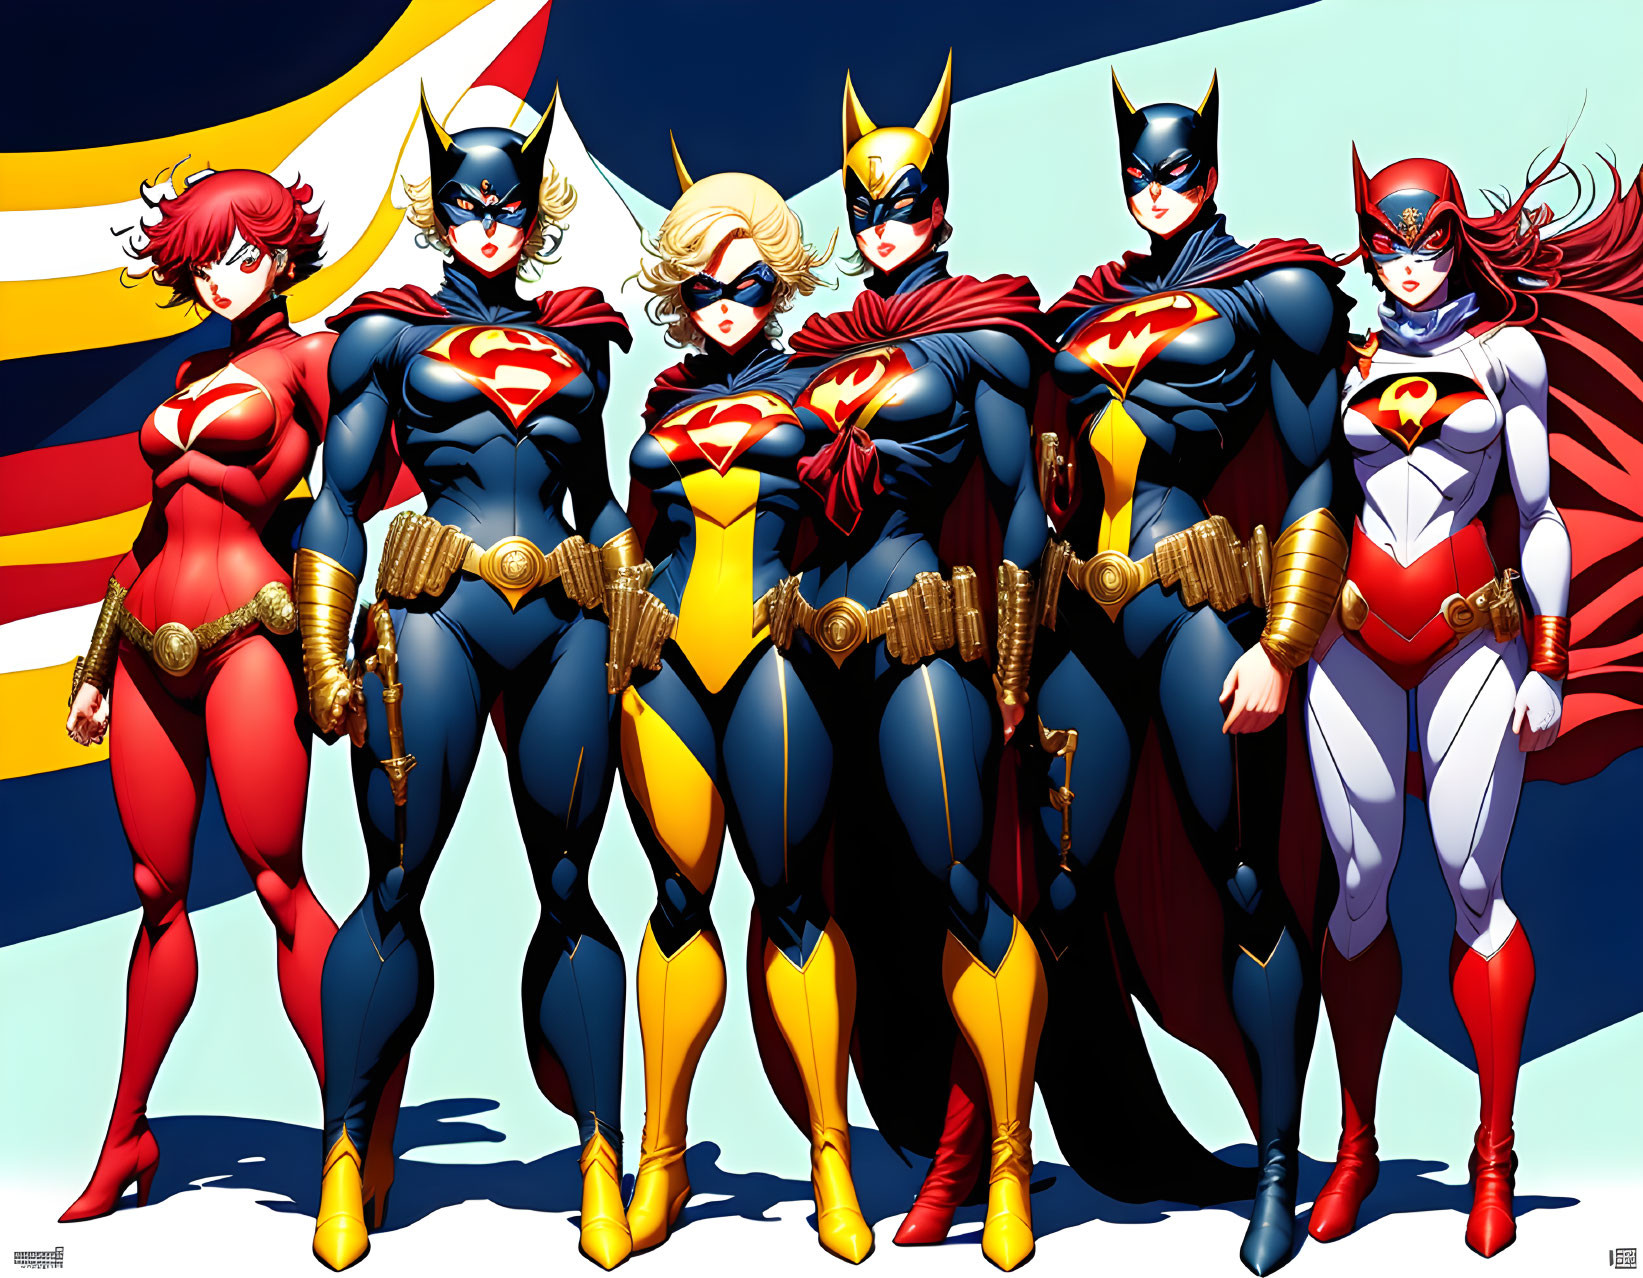 A Famous Anime Female Injustice Society of America